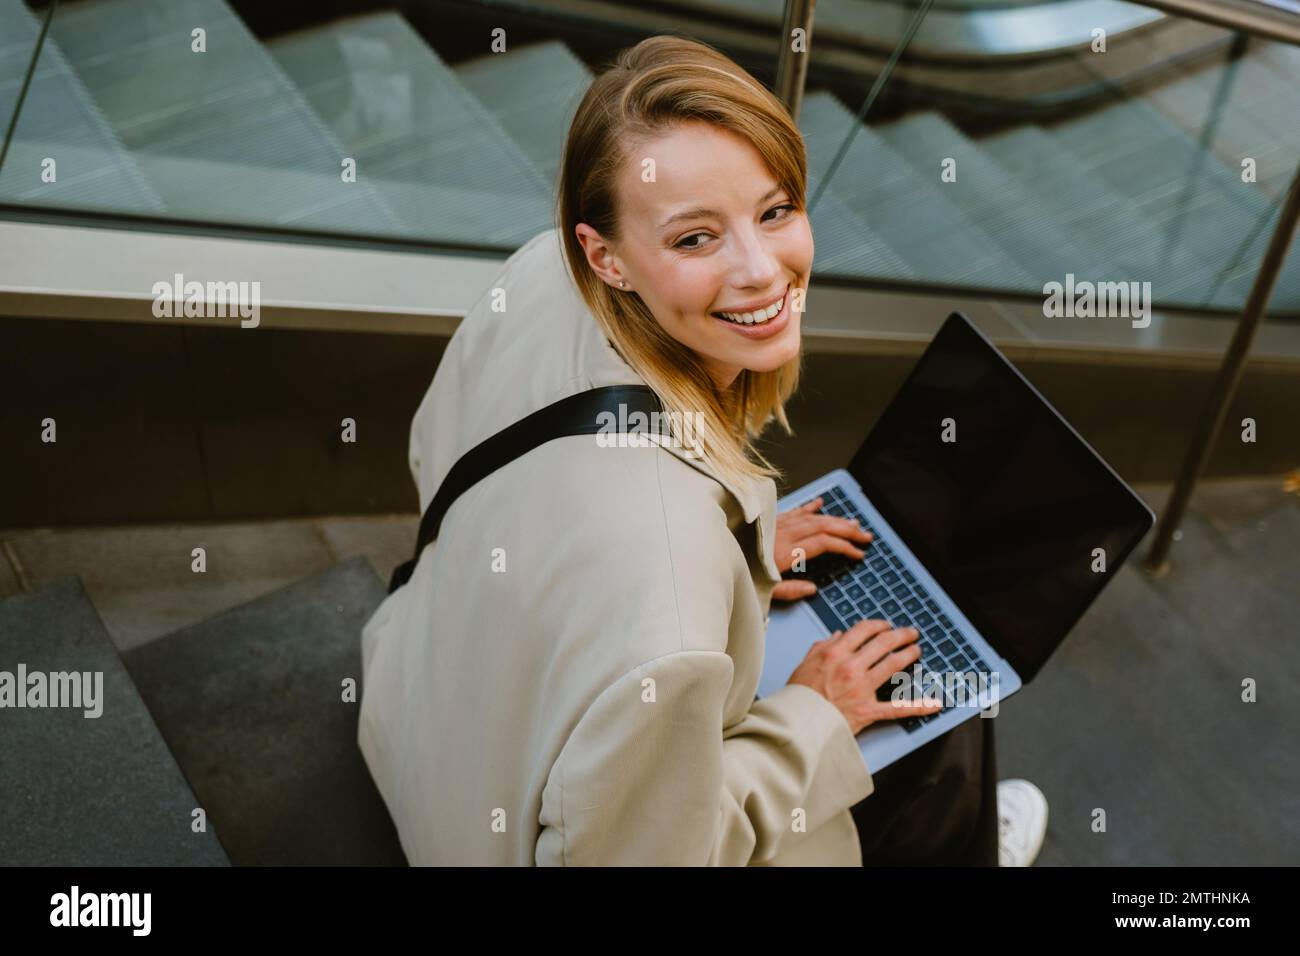 Young white woman smiling and using laptop while sitting on stairs outdoors Stock Photo